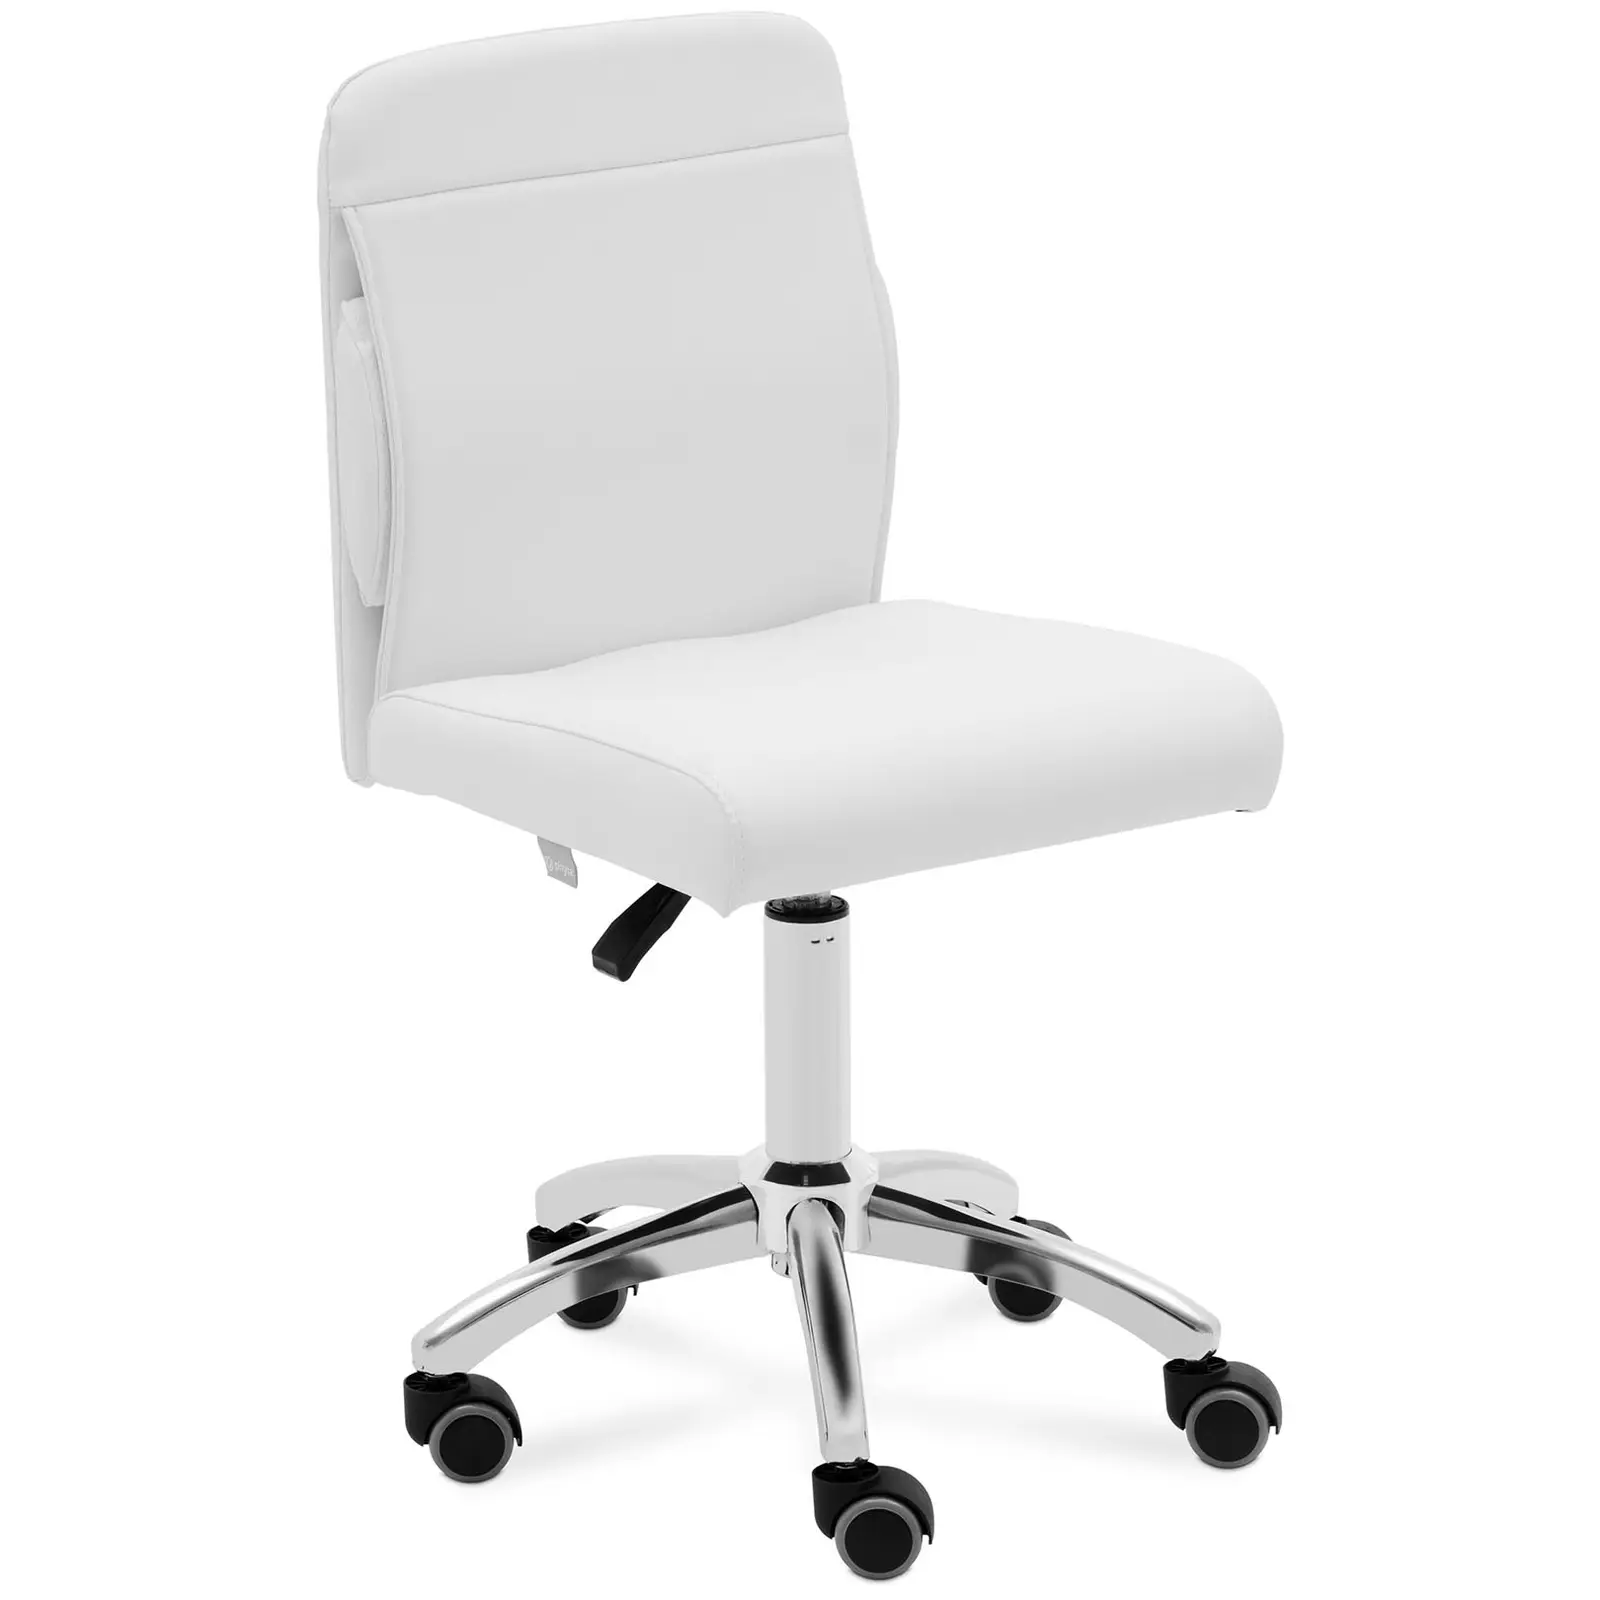 Stool Chair With Back - 48 - 62 cm - 150 kg - white